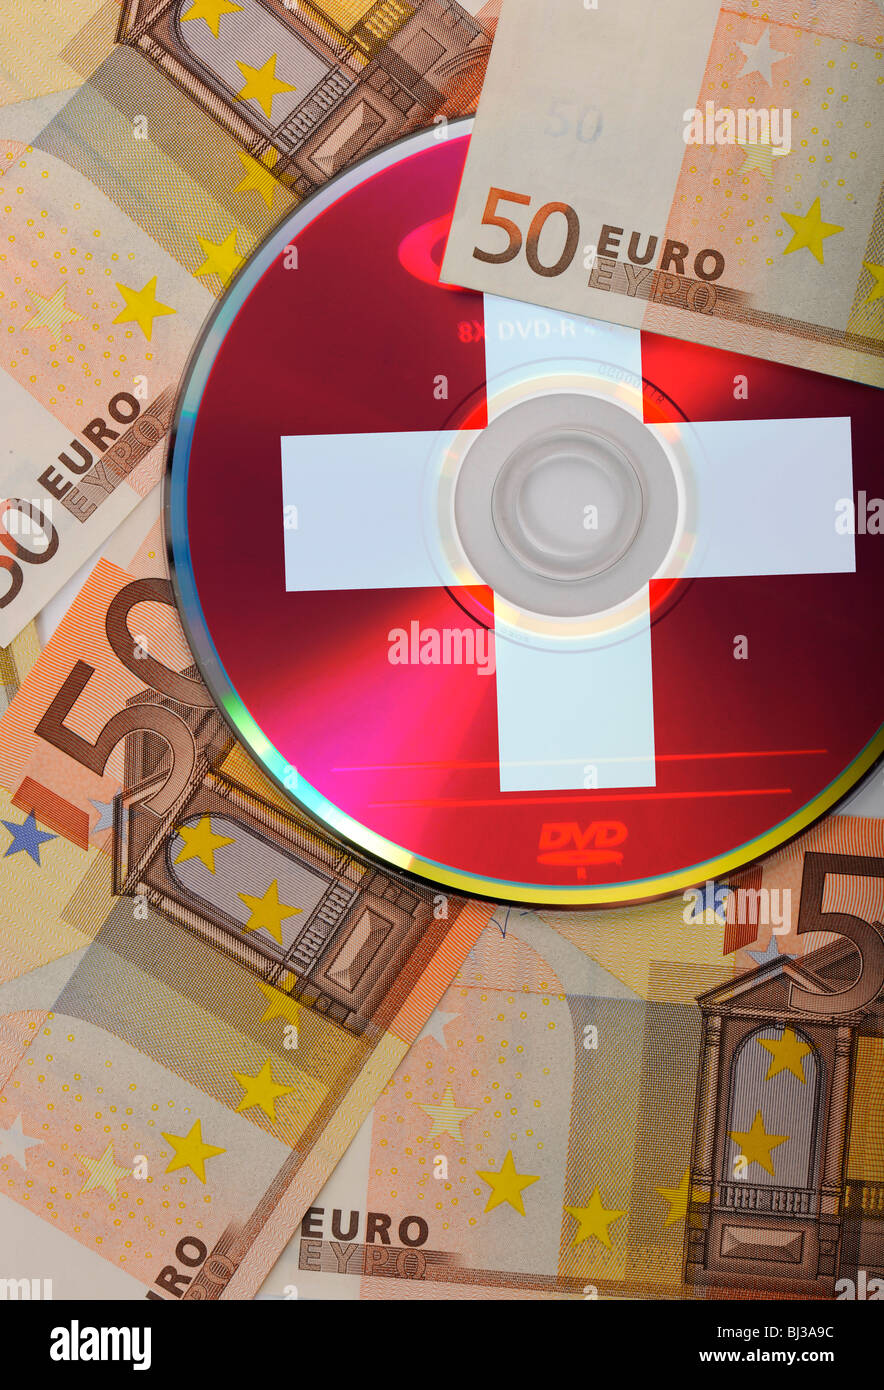 DVD, CD, euro bills, national flag of Switzerland, symbolic image for the purchase of bank records, tax evasion, banking confid Stock Photo